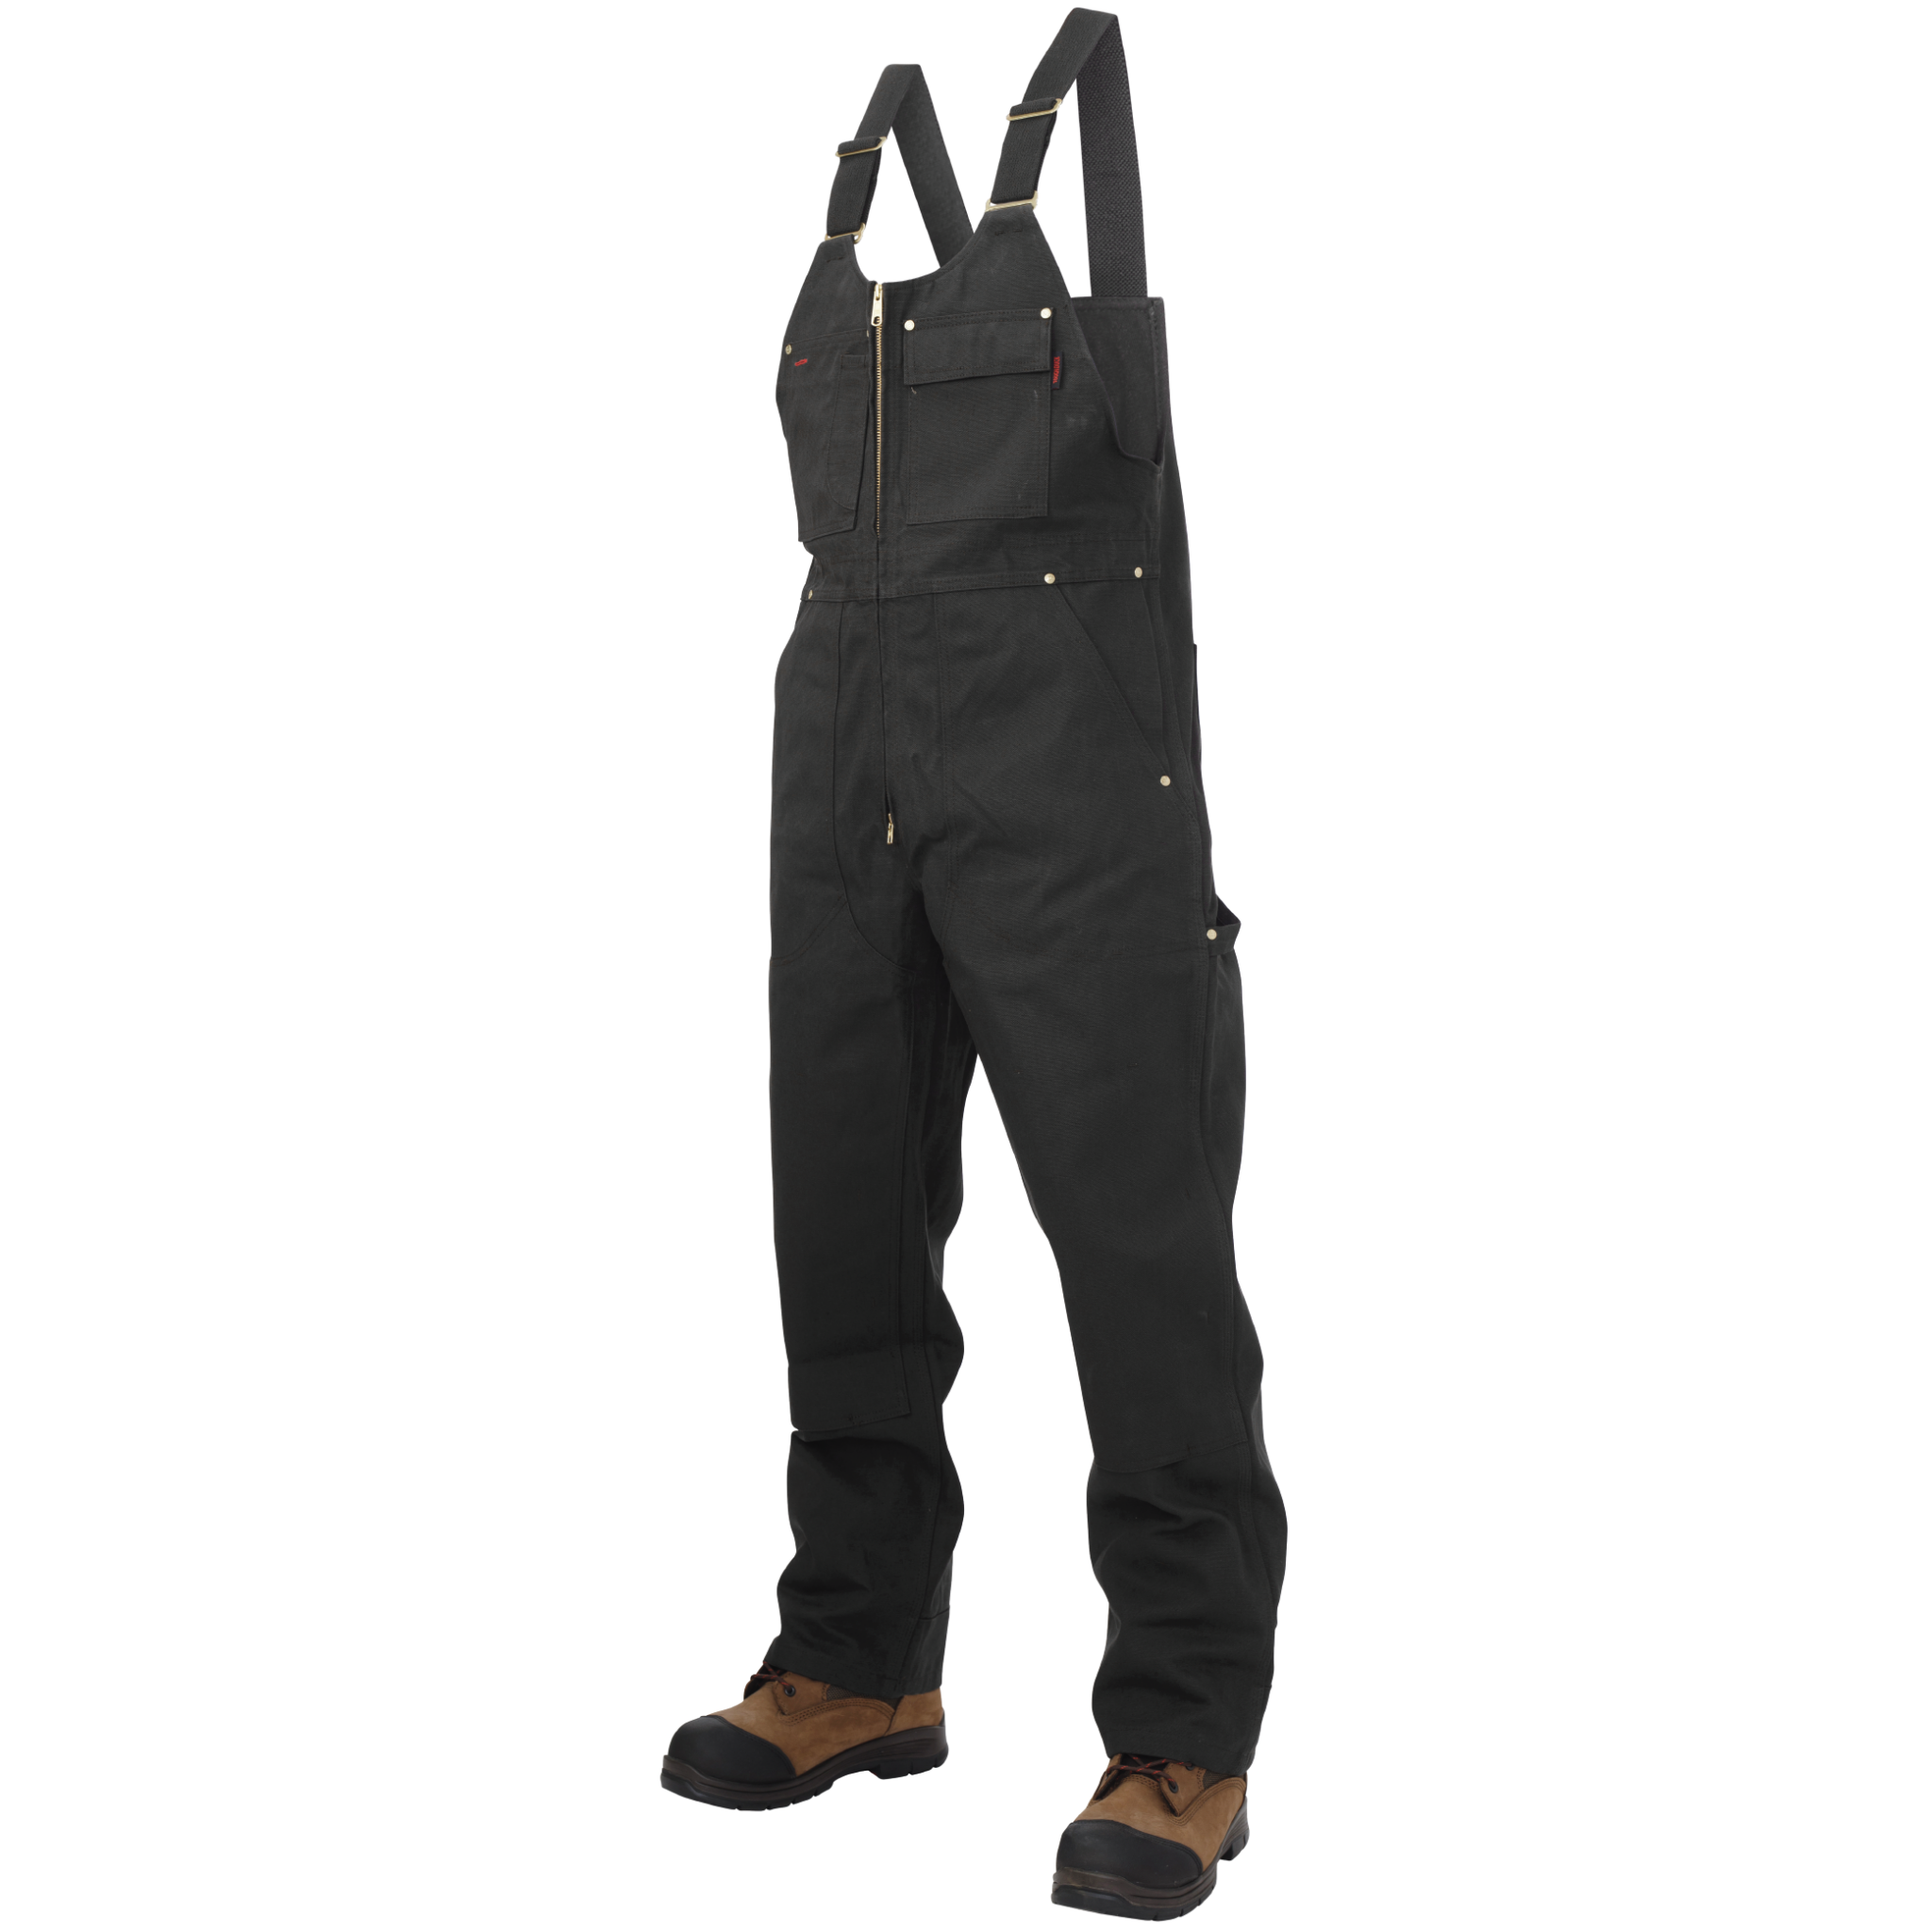 Tough Duck Insulated Vest – Ecotrex